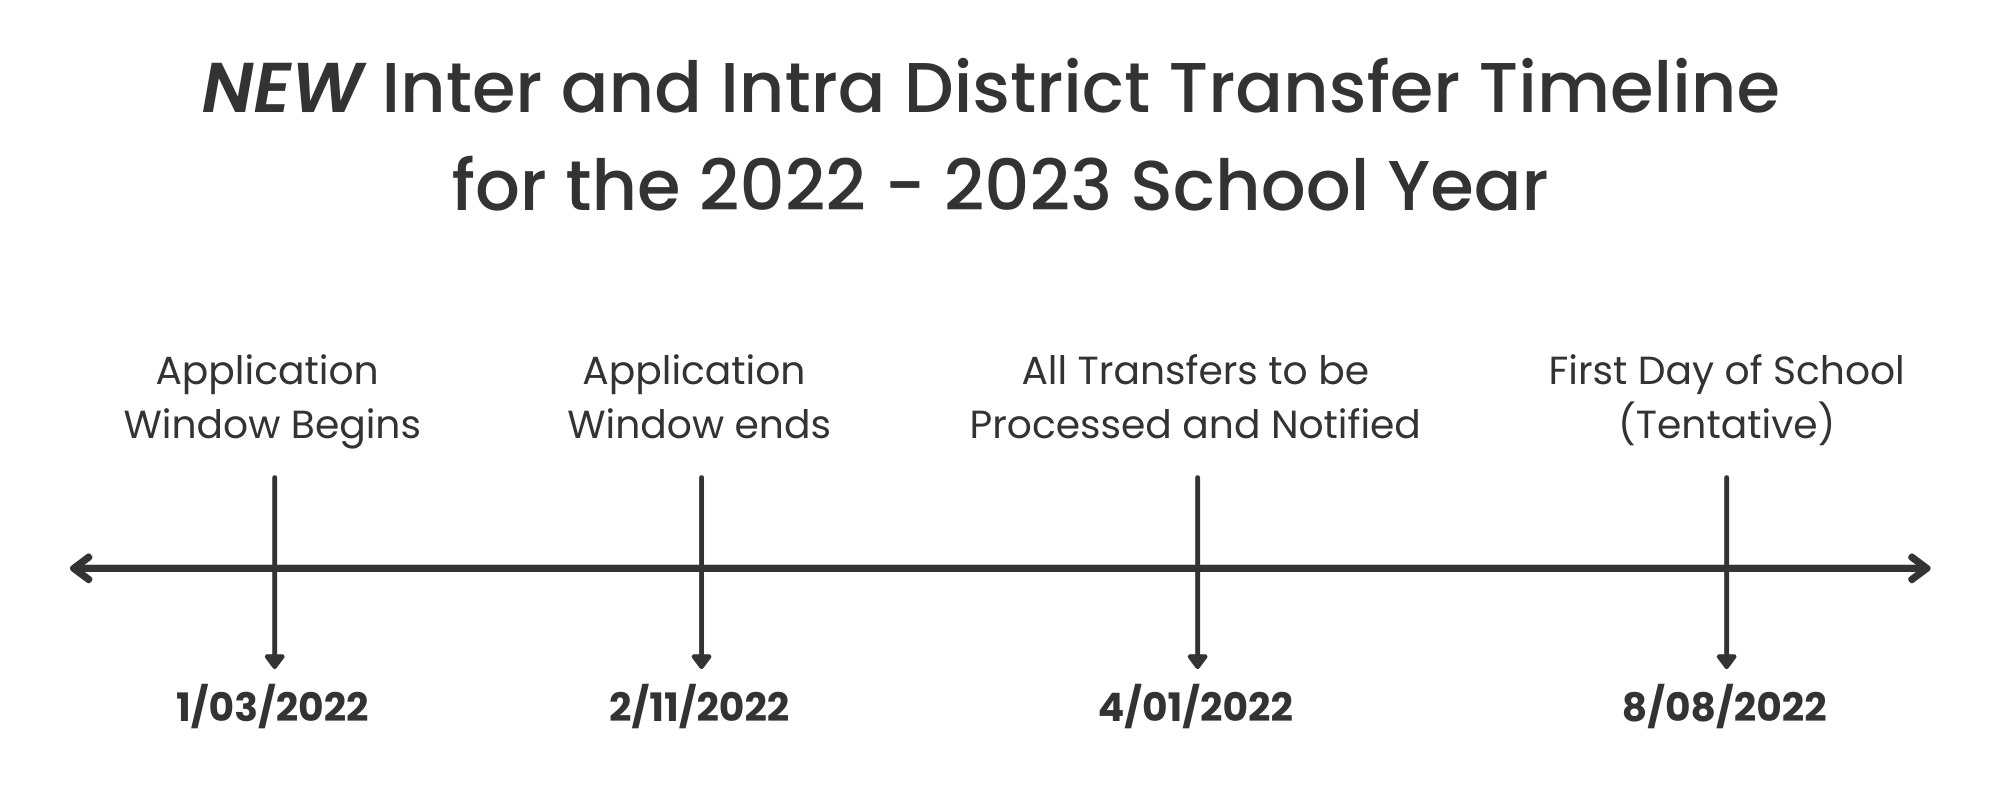 Inter and Intra District Transfer Timeline for the 2022-2023 School Year